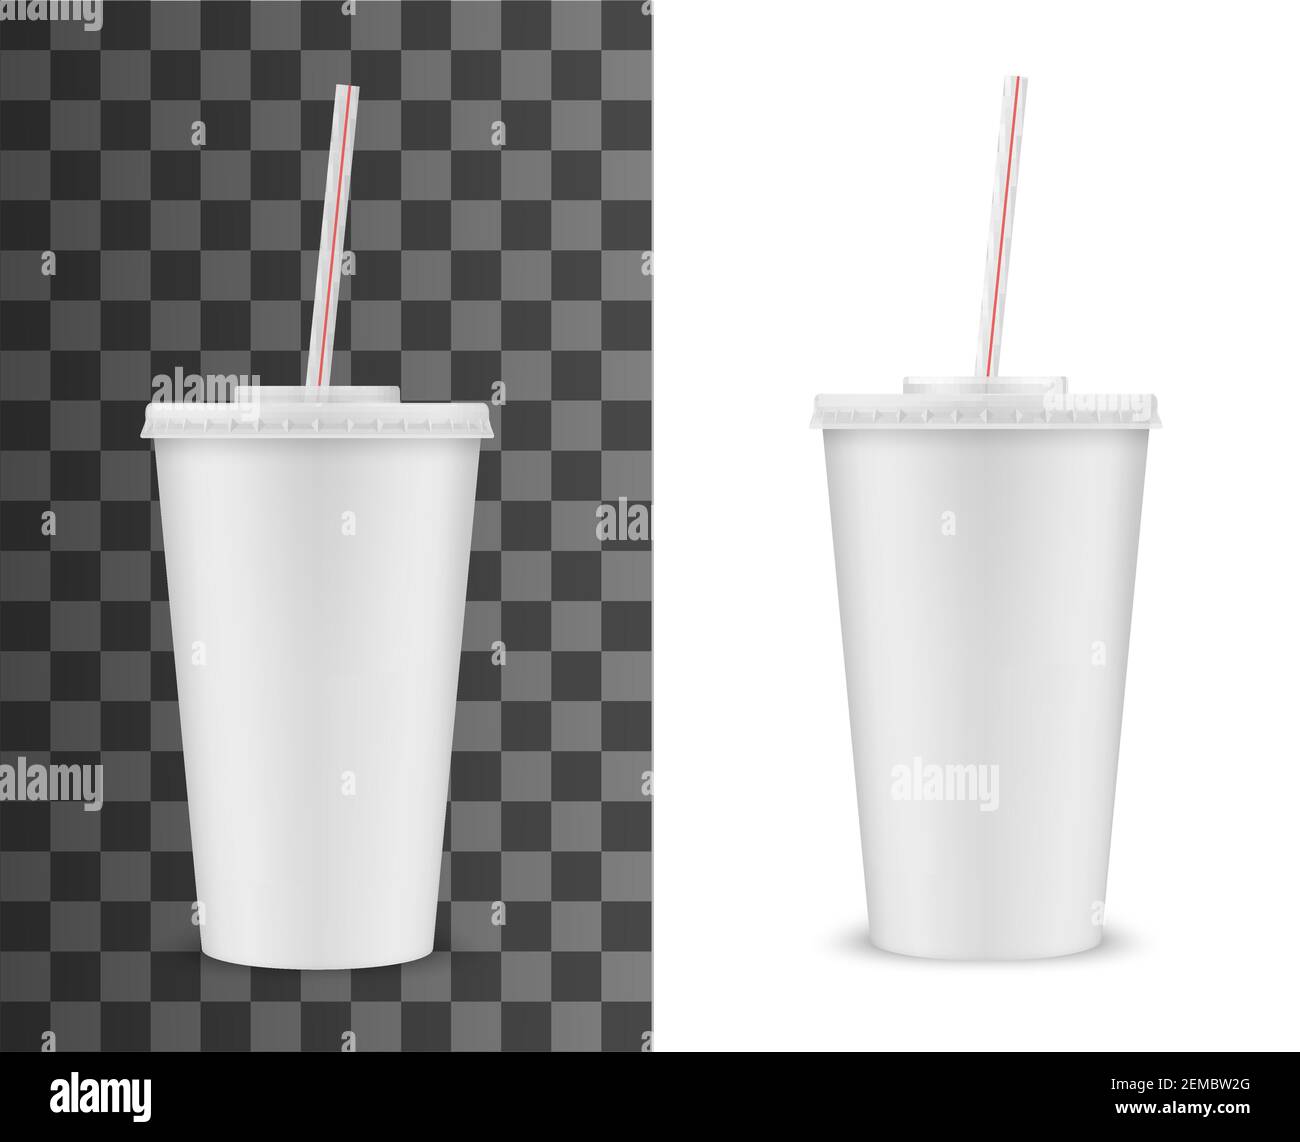 https://c8.alamy.com/comp/2EMBW2G/disposable-plastic-cup-with-lid-and-straw-isolated-3d-realistic-vector-mockup-blank-white-takeaway-cup-for-cold-or-hot-drink-soda-beverage-and-coffe-2EMBW2G.jpg